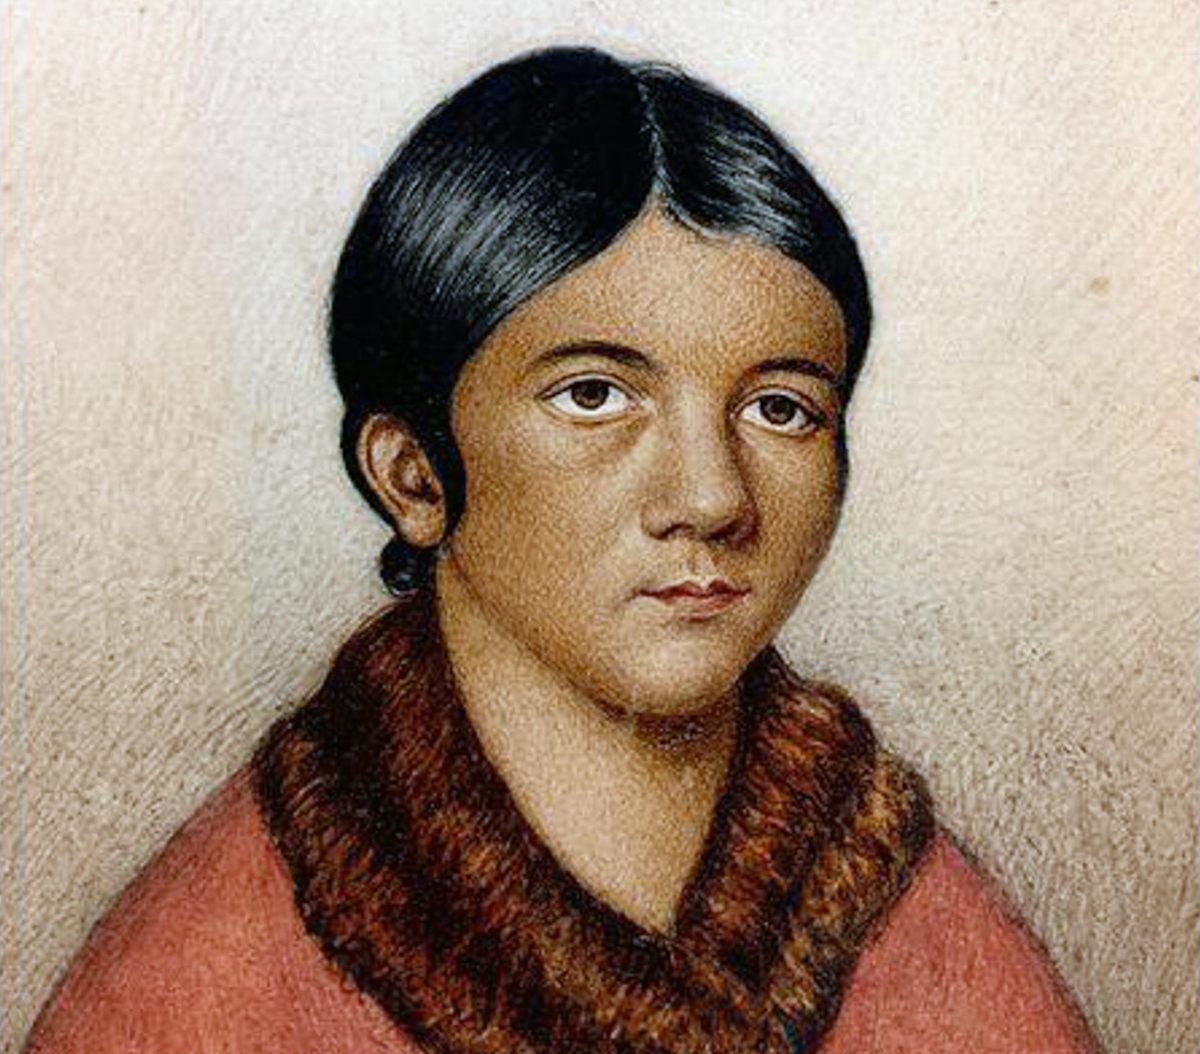 A mid-19th century painting often claimed to be a portrait of Shanawdithit but most likely a copy of an 1819 portrait of another Beothuk woman, Demasduit, by Lady Henrietta Hamilton. Various sources attribute this c. 1841 painting to naturalist Philip Henry Gosse or painter William Gosse.